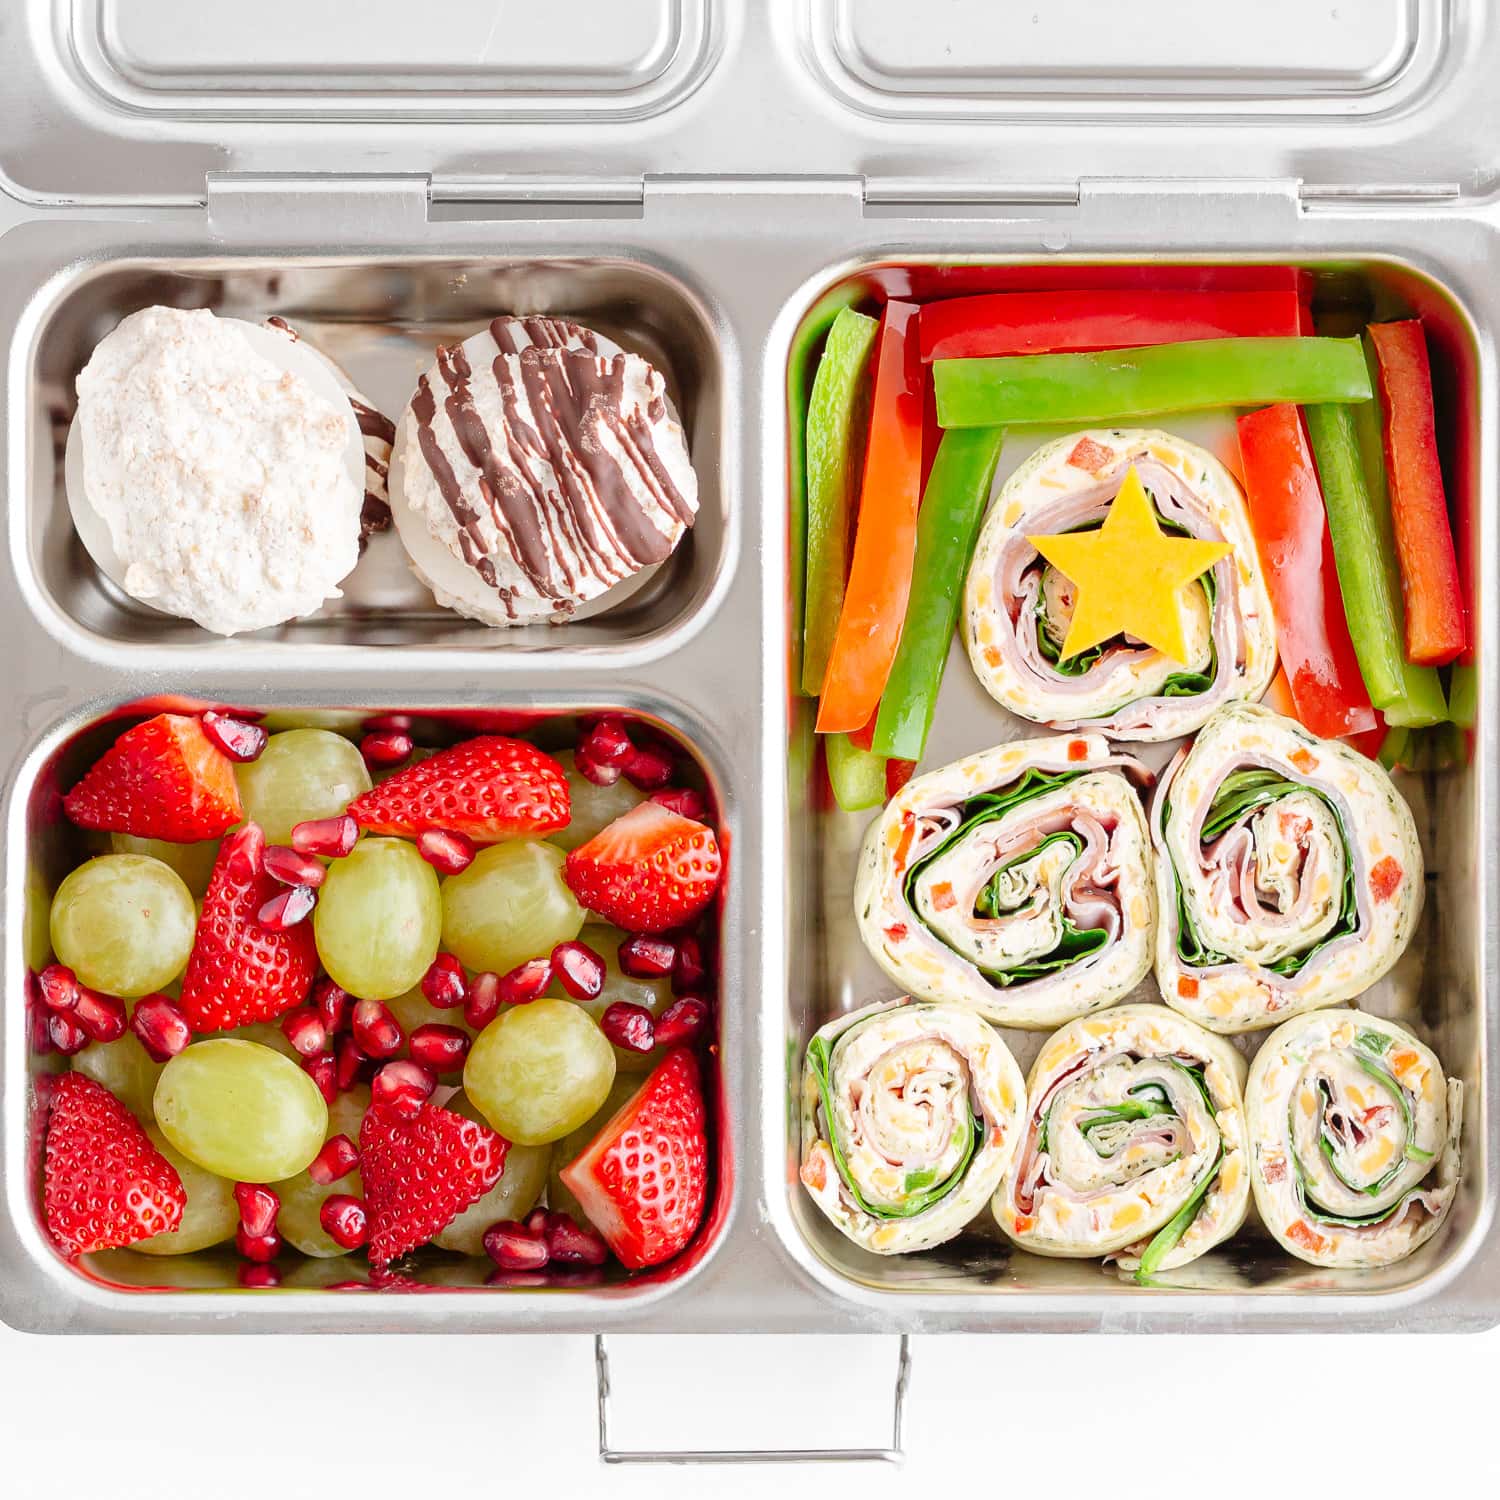 A Christmas themed lunch in a stainless steel bento box.